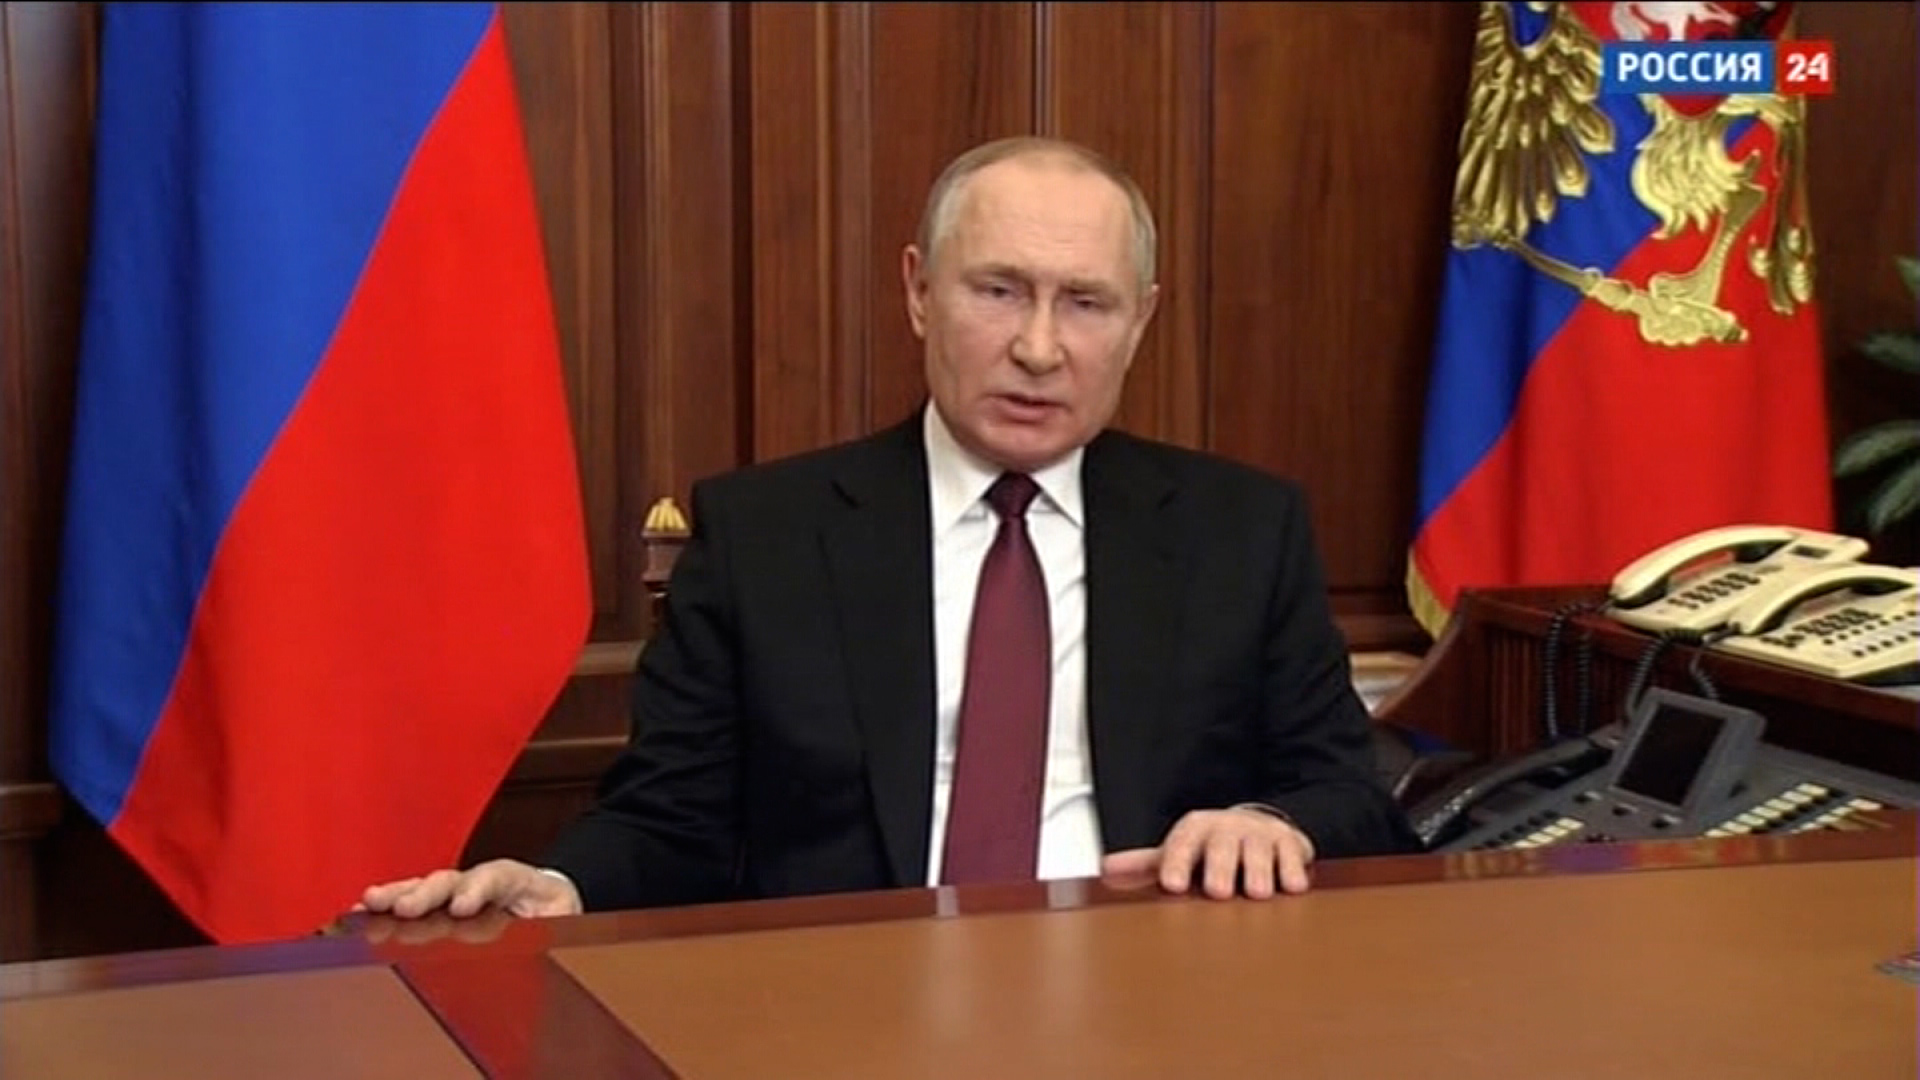 Russian state television broadcasts an address by Russian President Vladimir Putin on February 24.